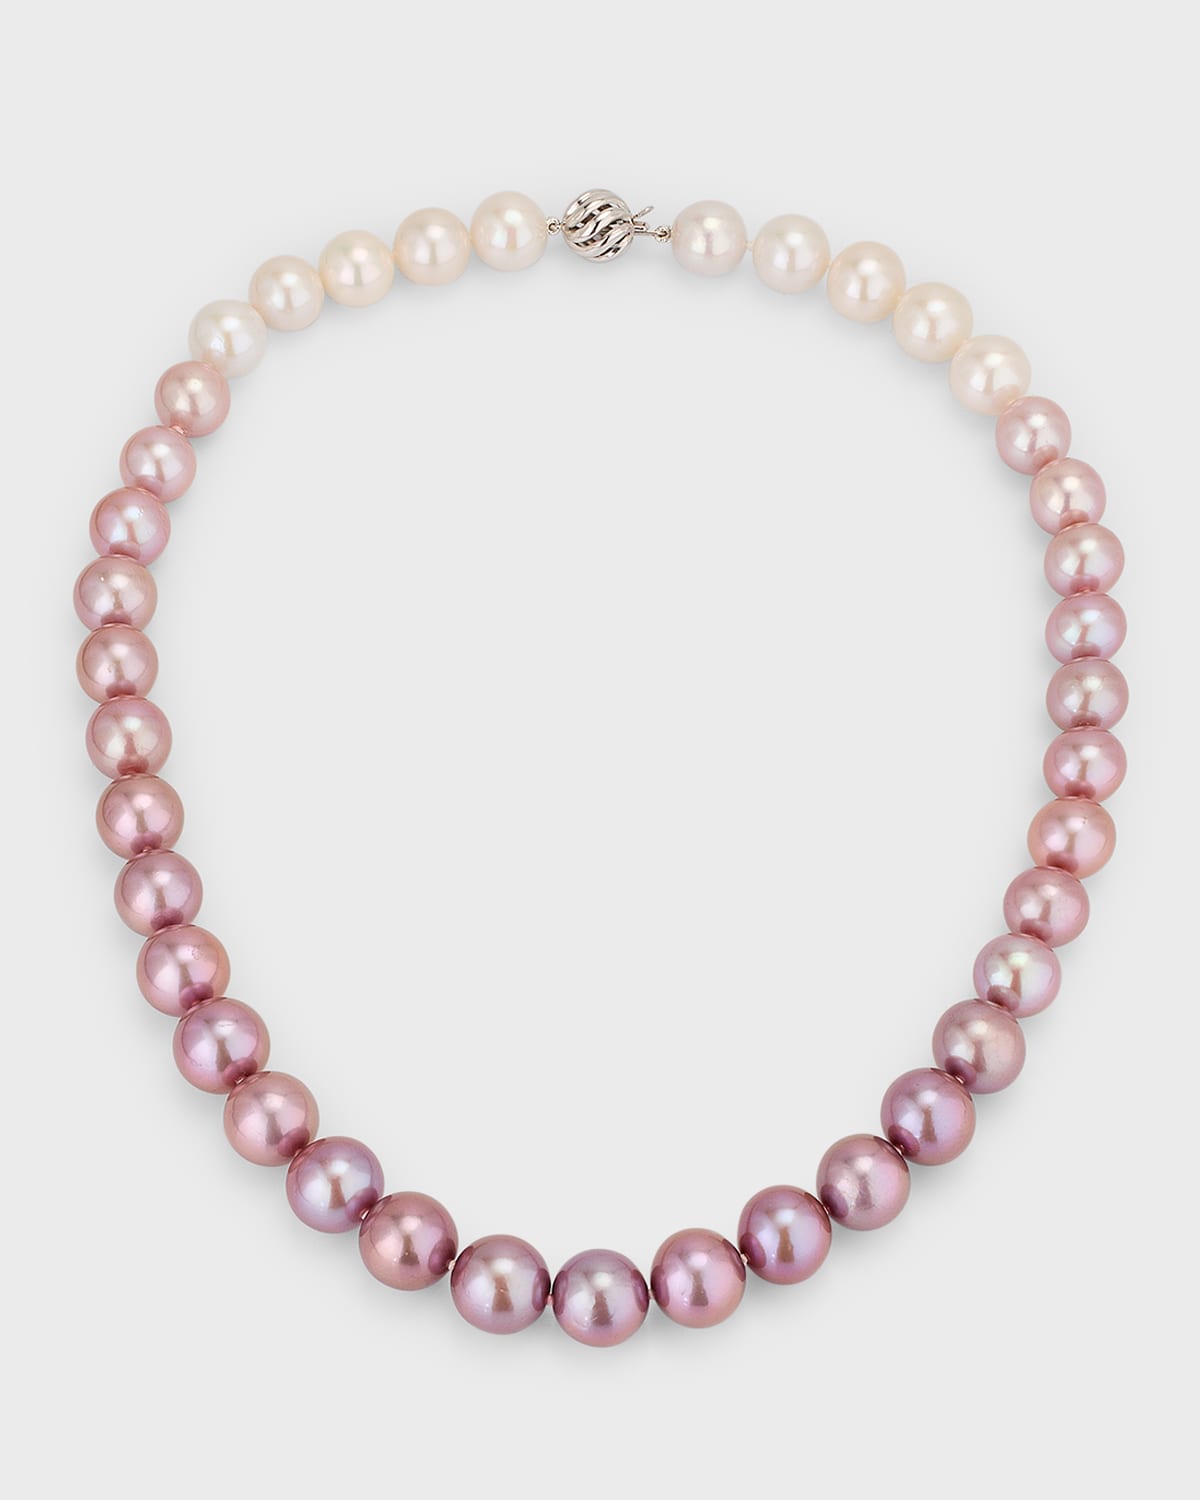 18K White Gold Purple Ombre Pearl Necklace, 10-12mm